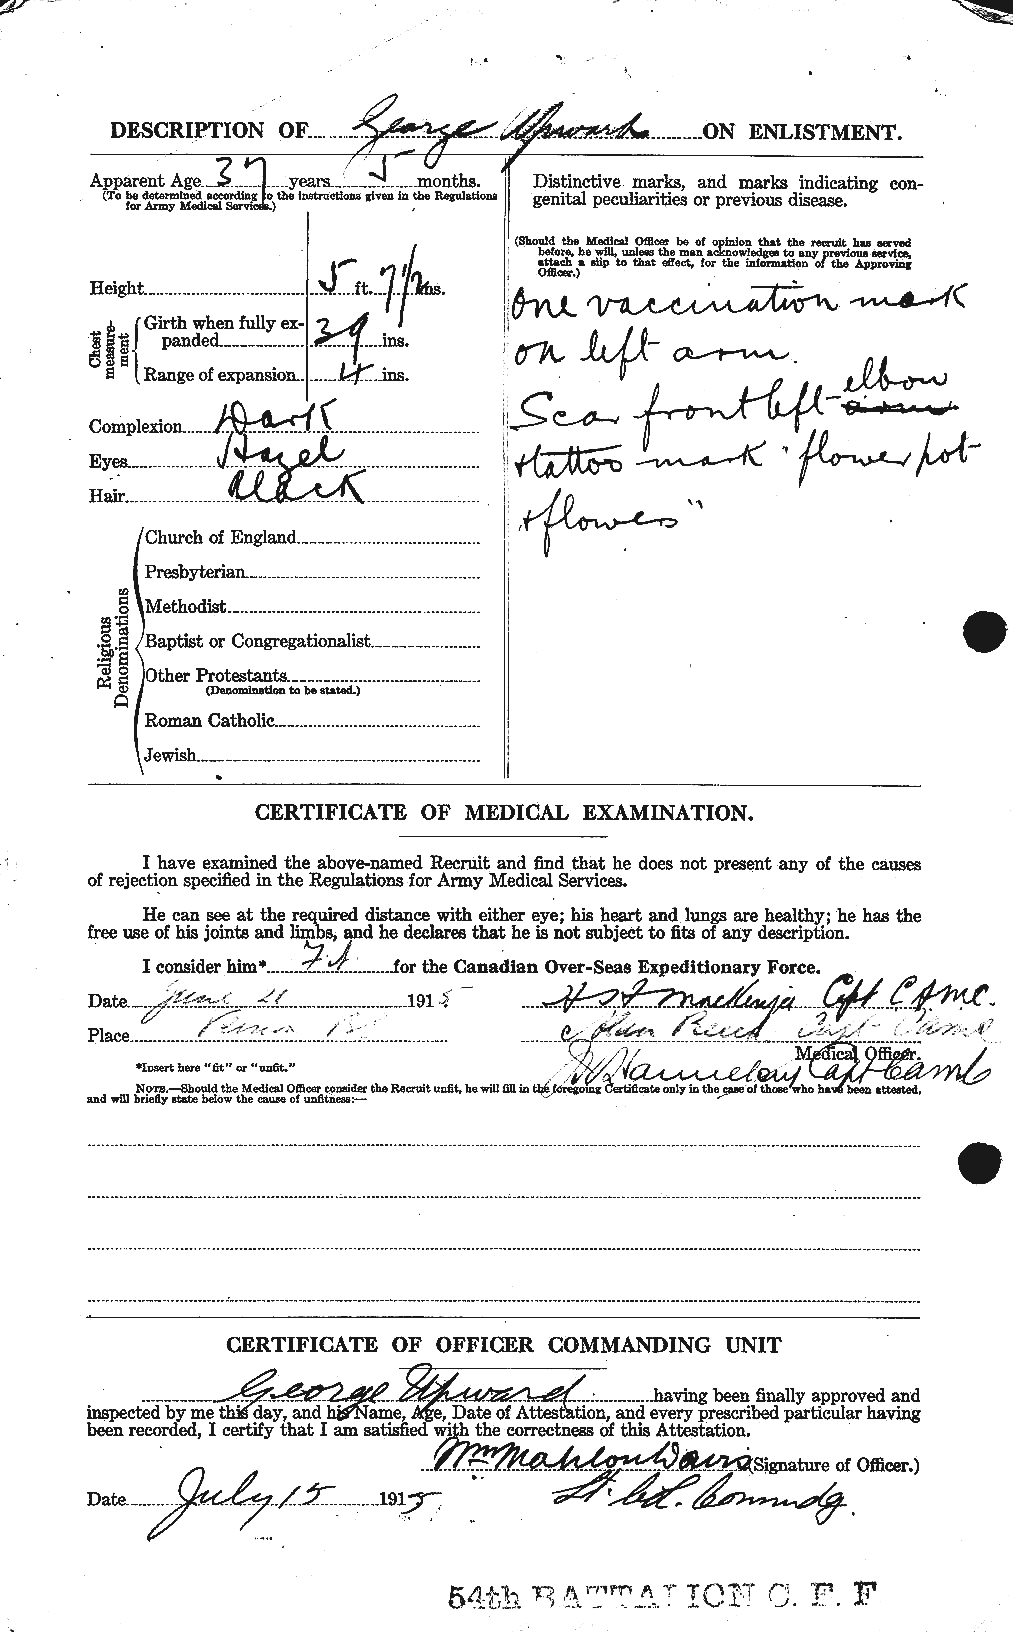 Personnel Records of the First World War - CEF 643197b